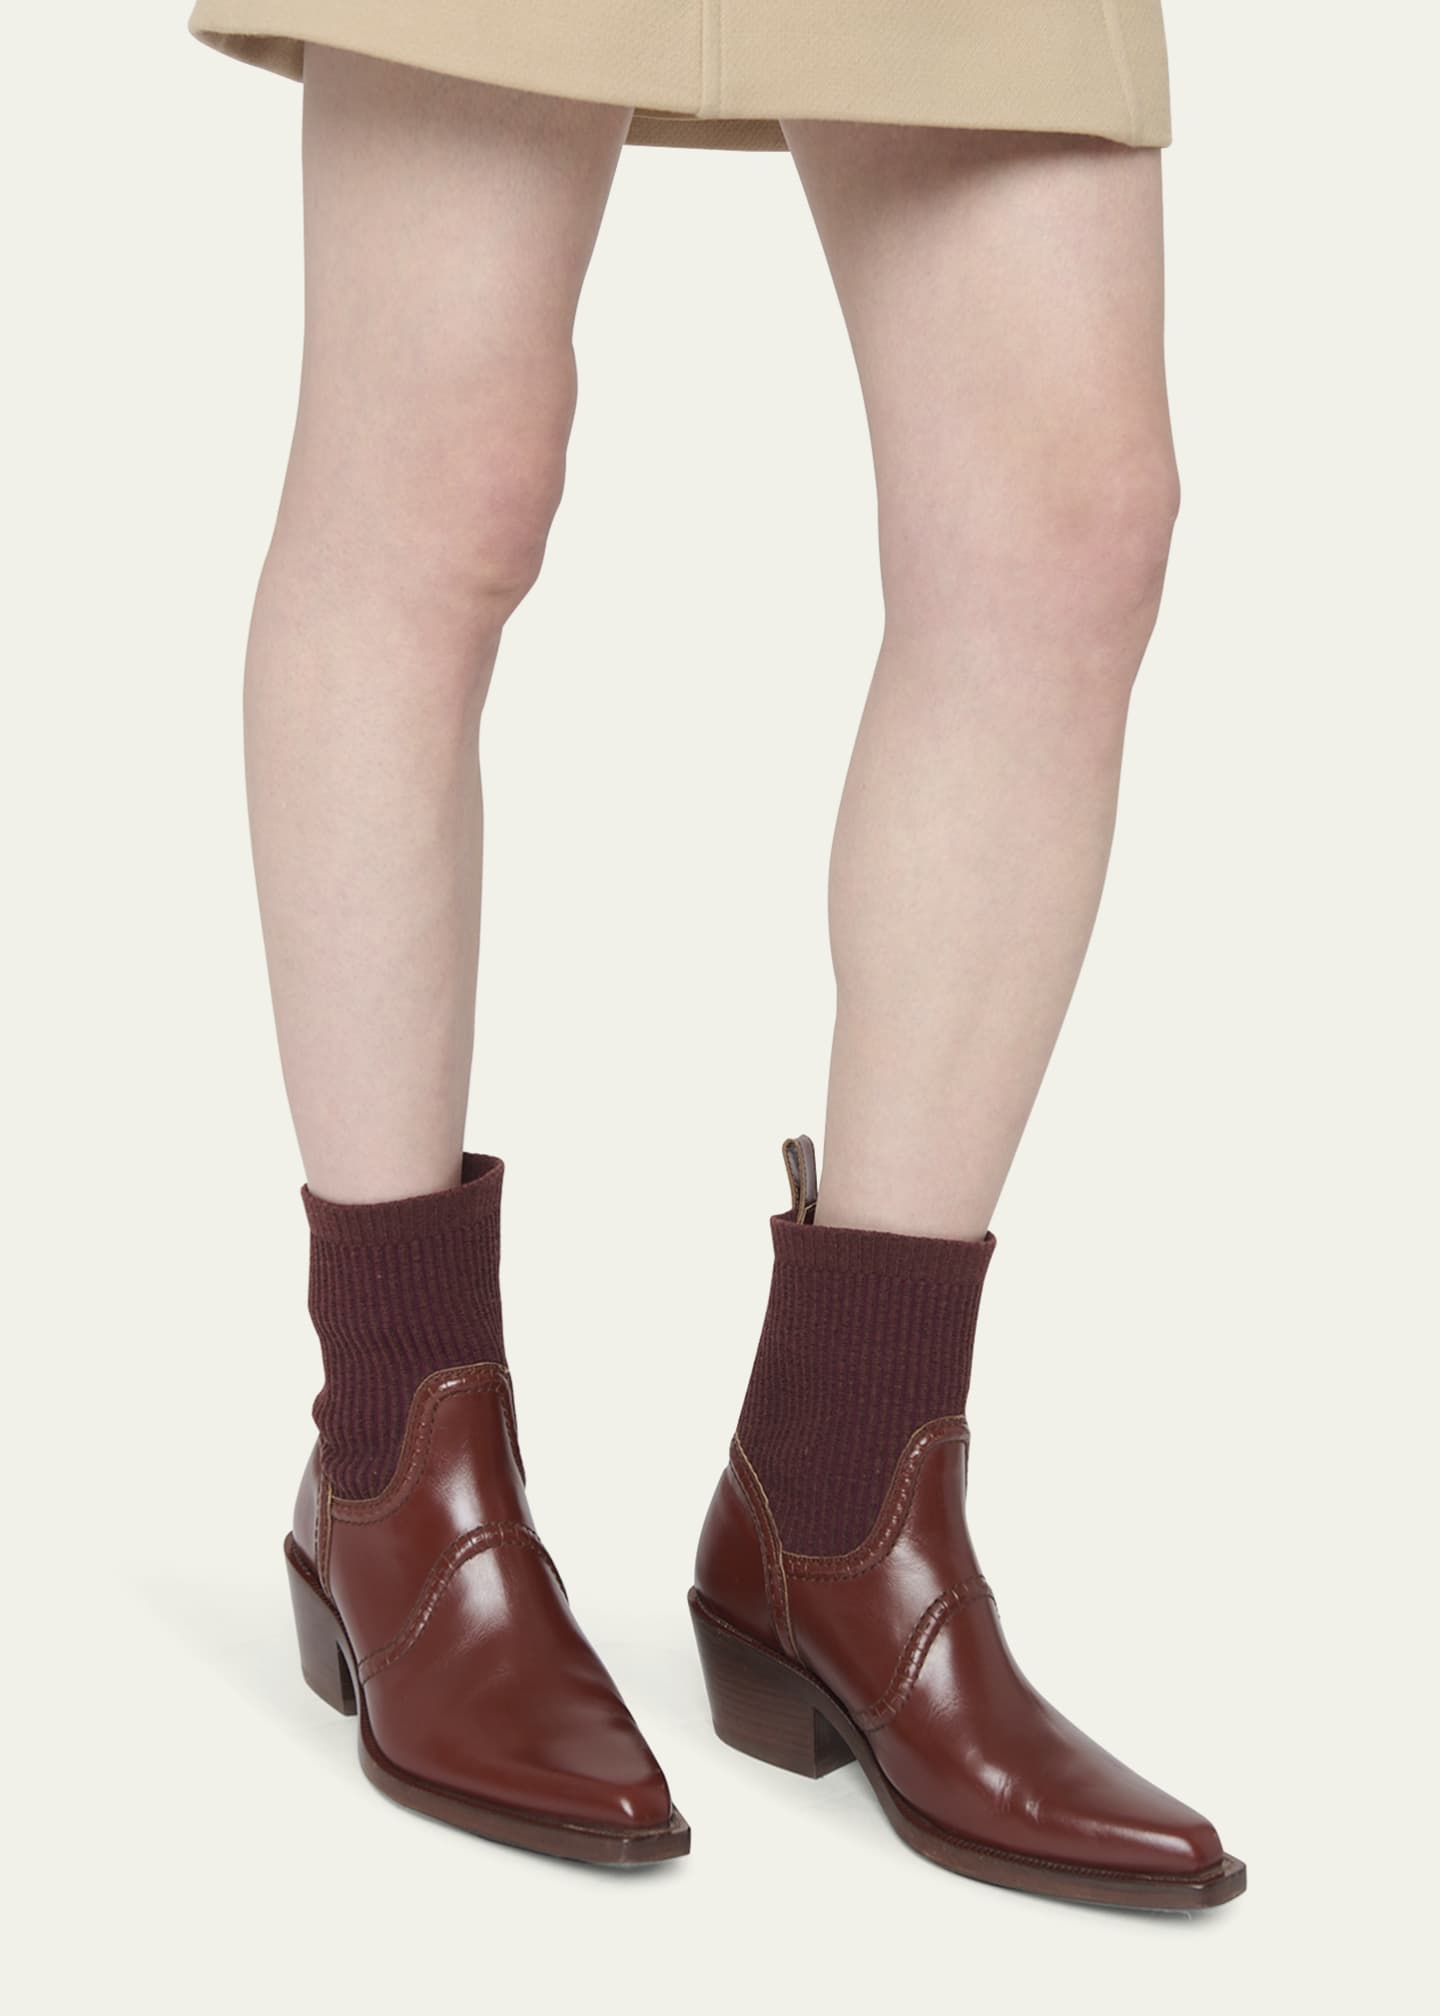 Chloe Nellie Western Sock Ankle Boots